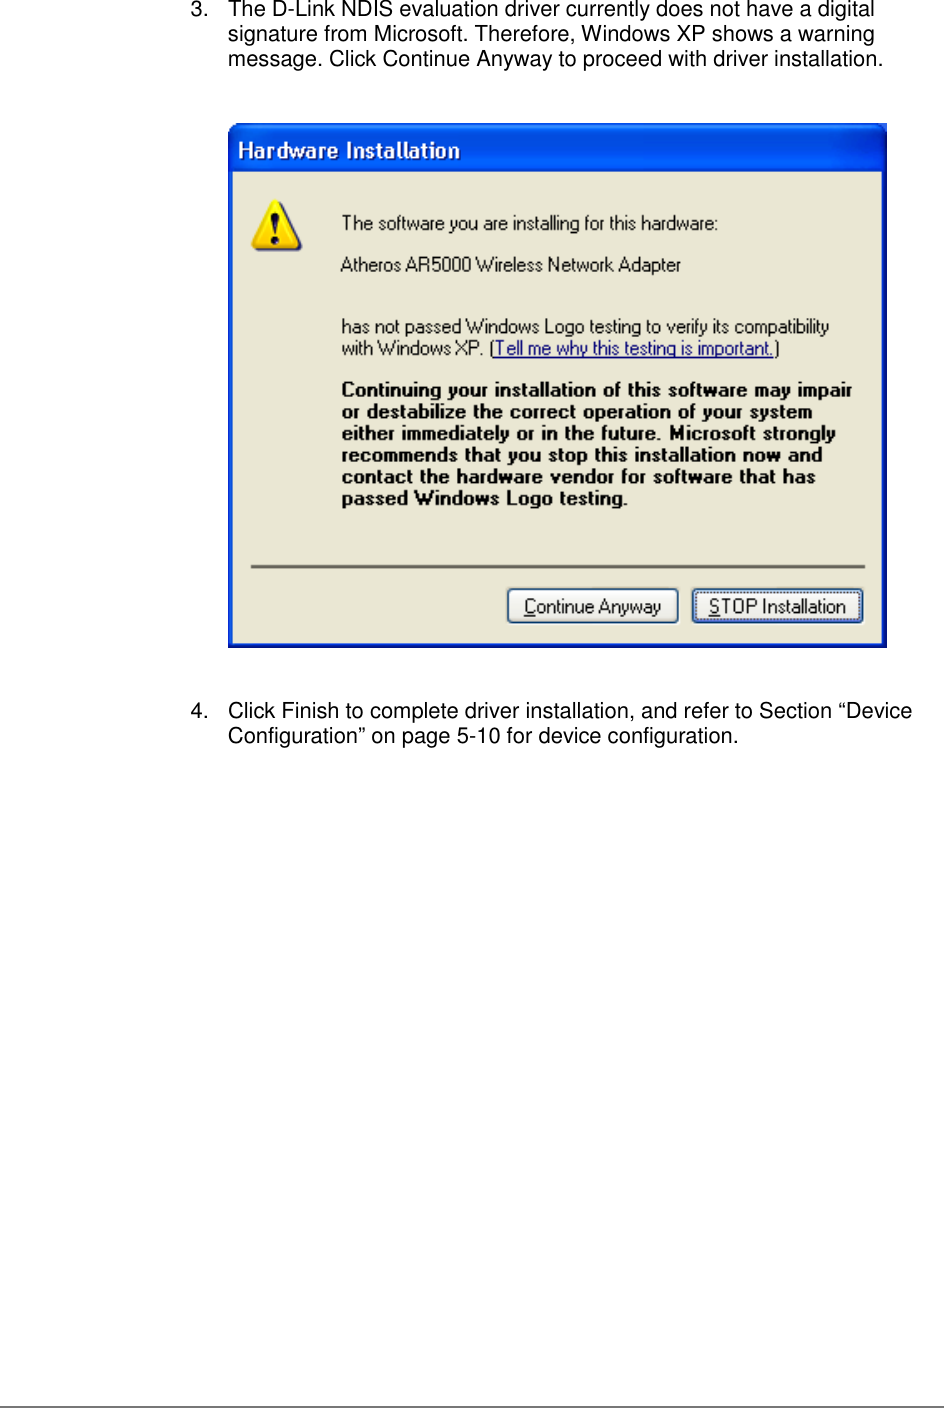 3.  The D-Link NDIS evaluation driver currently does not have a digitalsignature from Microsoft. Therefore, Windows XP shows a warningmessage. Click Continue Anyway to proceed with driver installation.4.  Click Finish to complete driver installation, and refer to Section “DeviceConfiguration” on page 5-10 for device configuration.